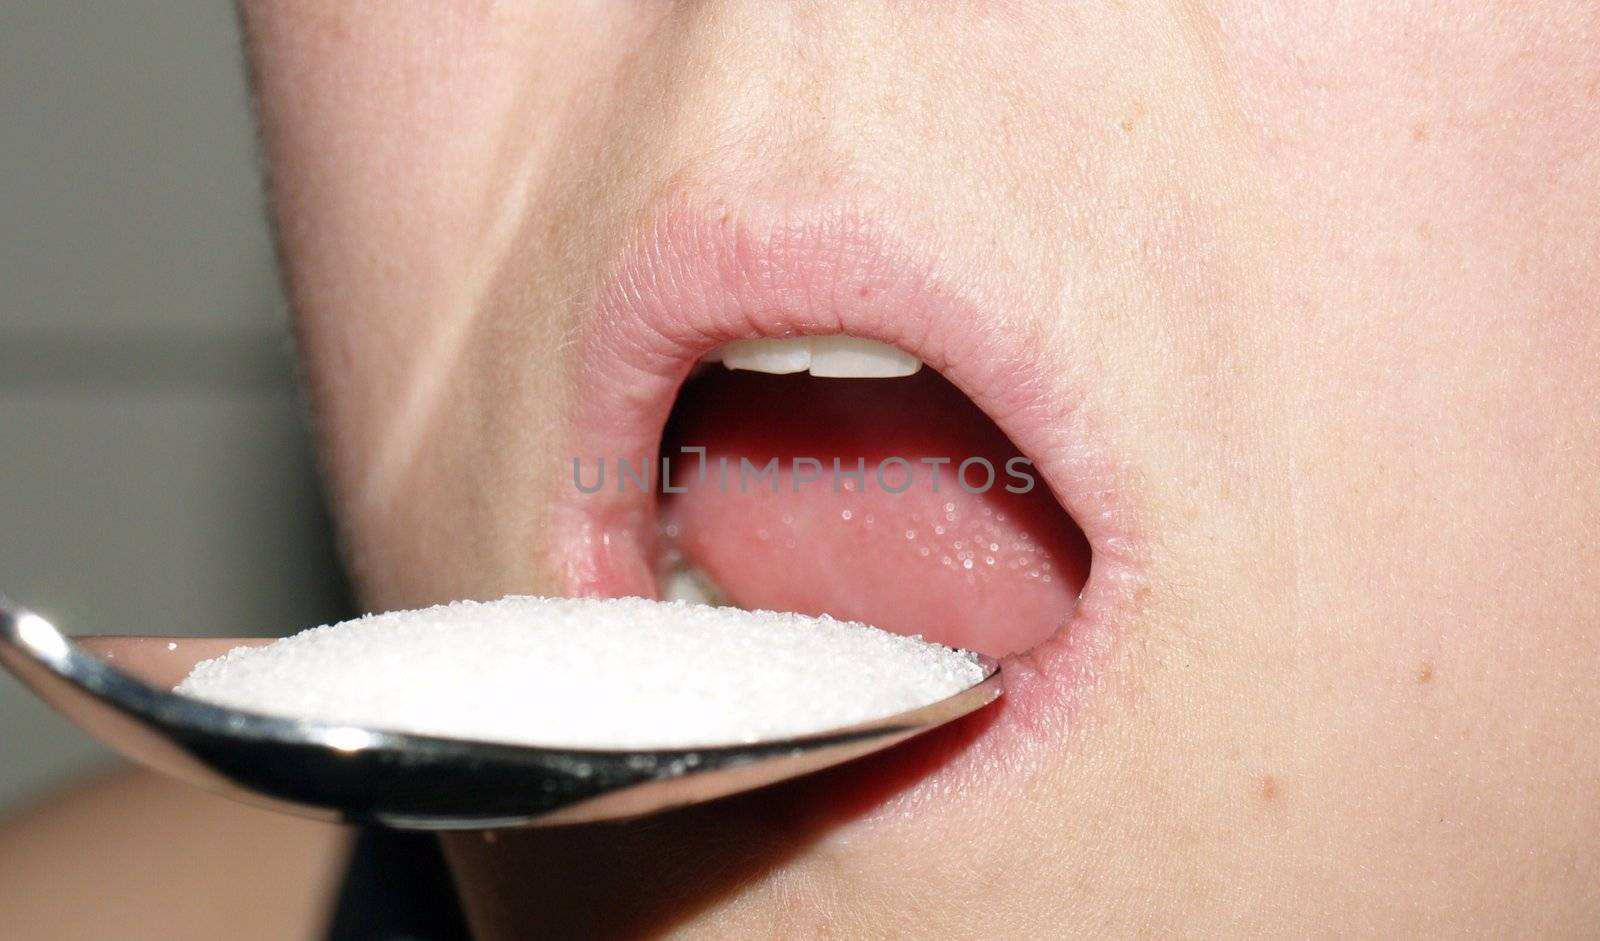 eating sugar with spoon